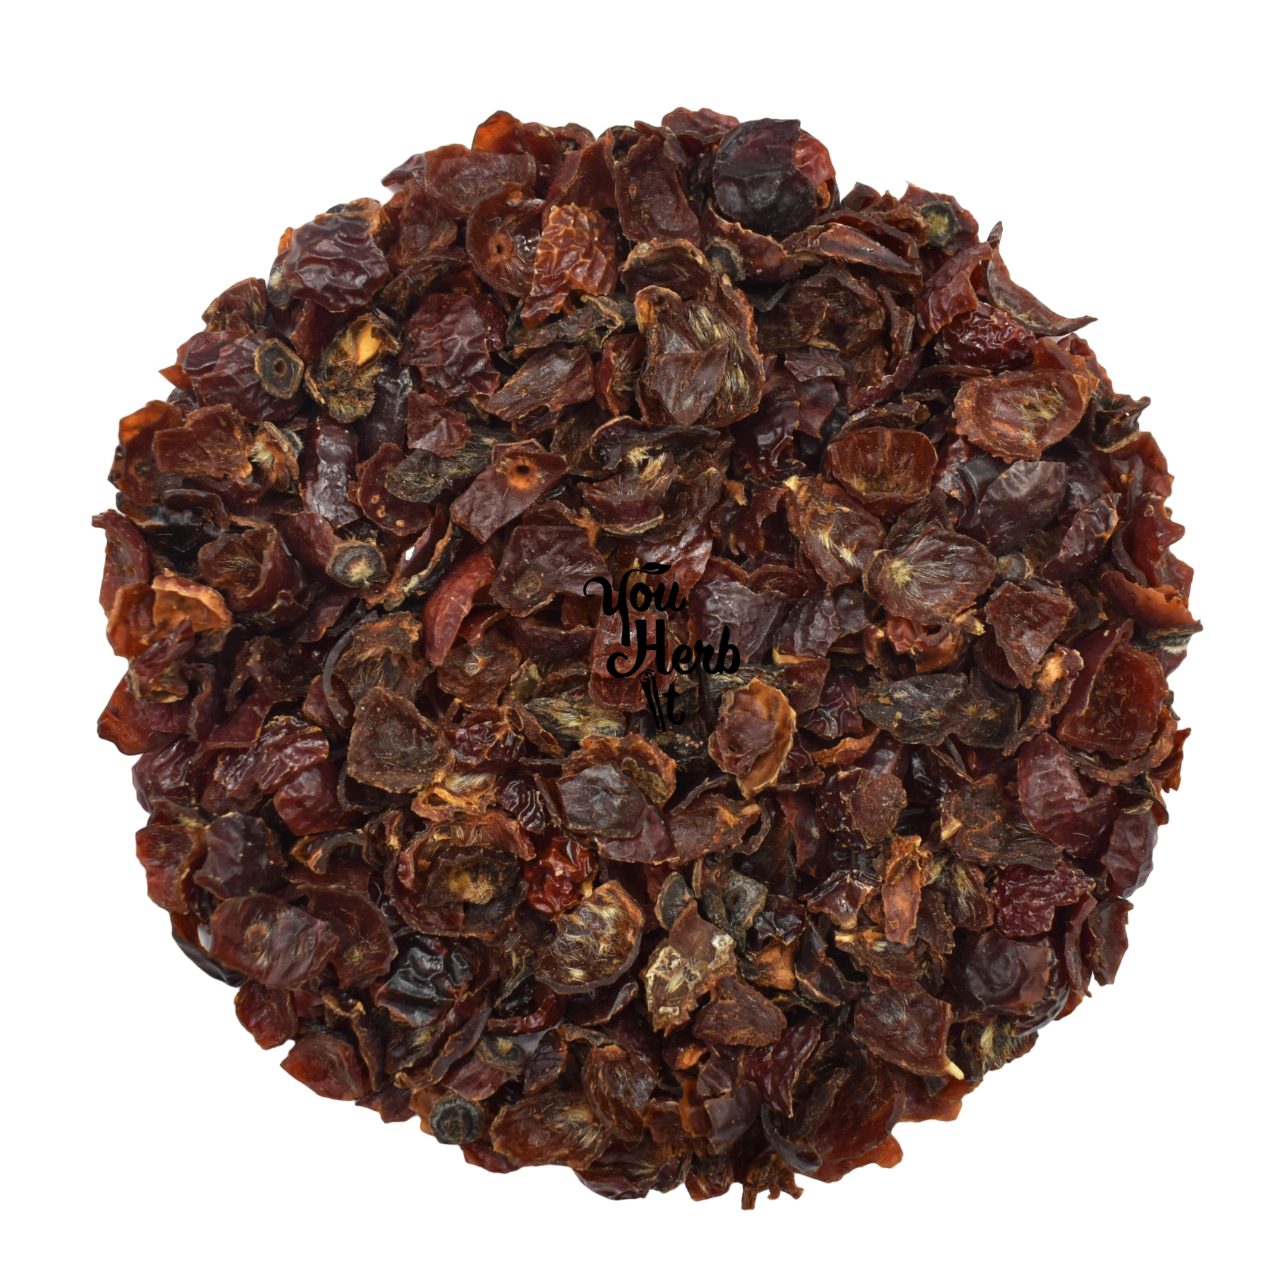 Edible Dried Rose Buds Flowers Tea, Whole Dried Roses Loose Leaf